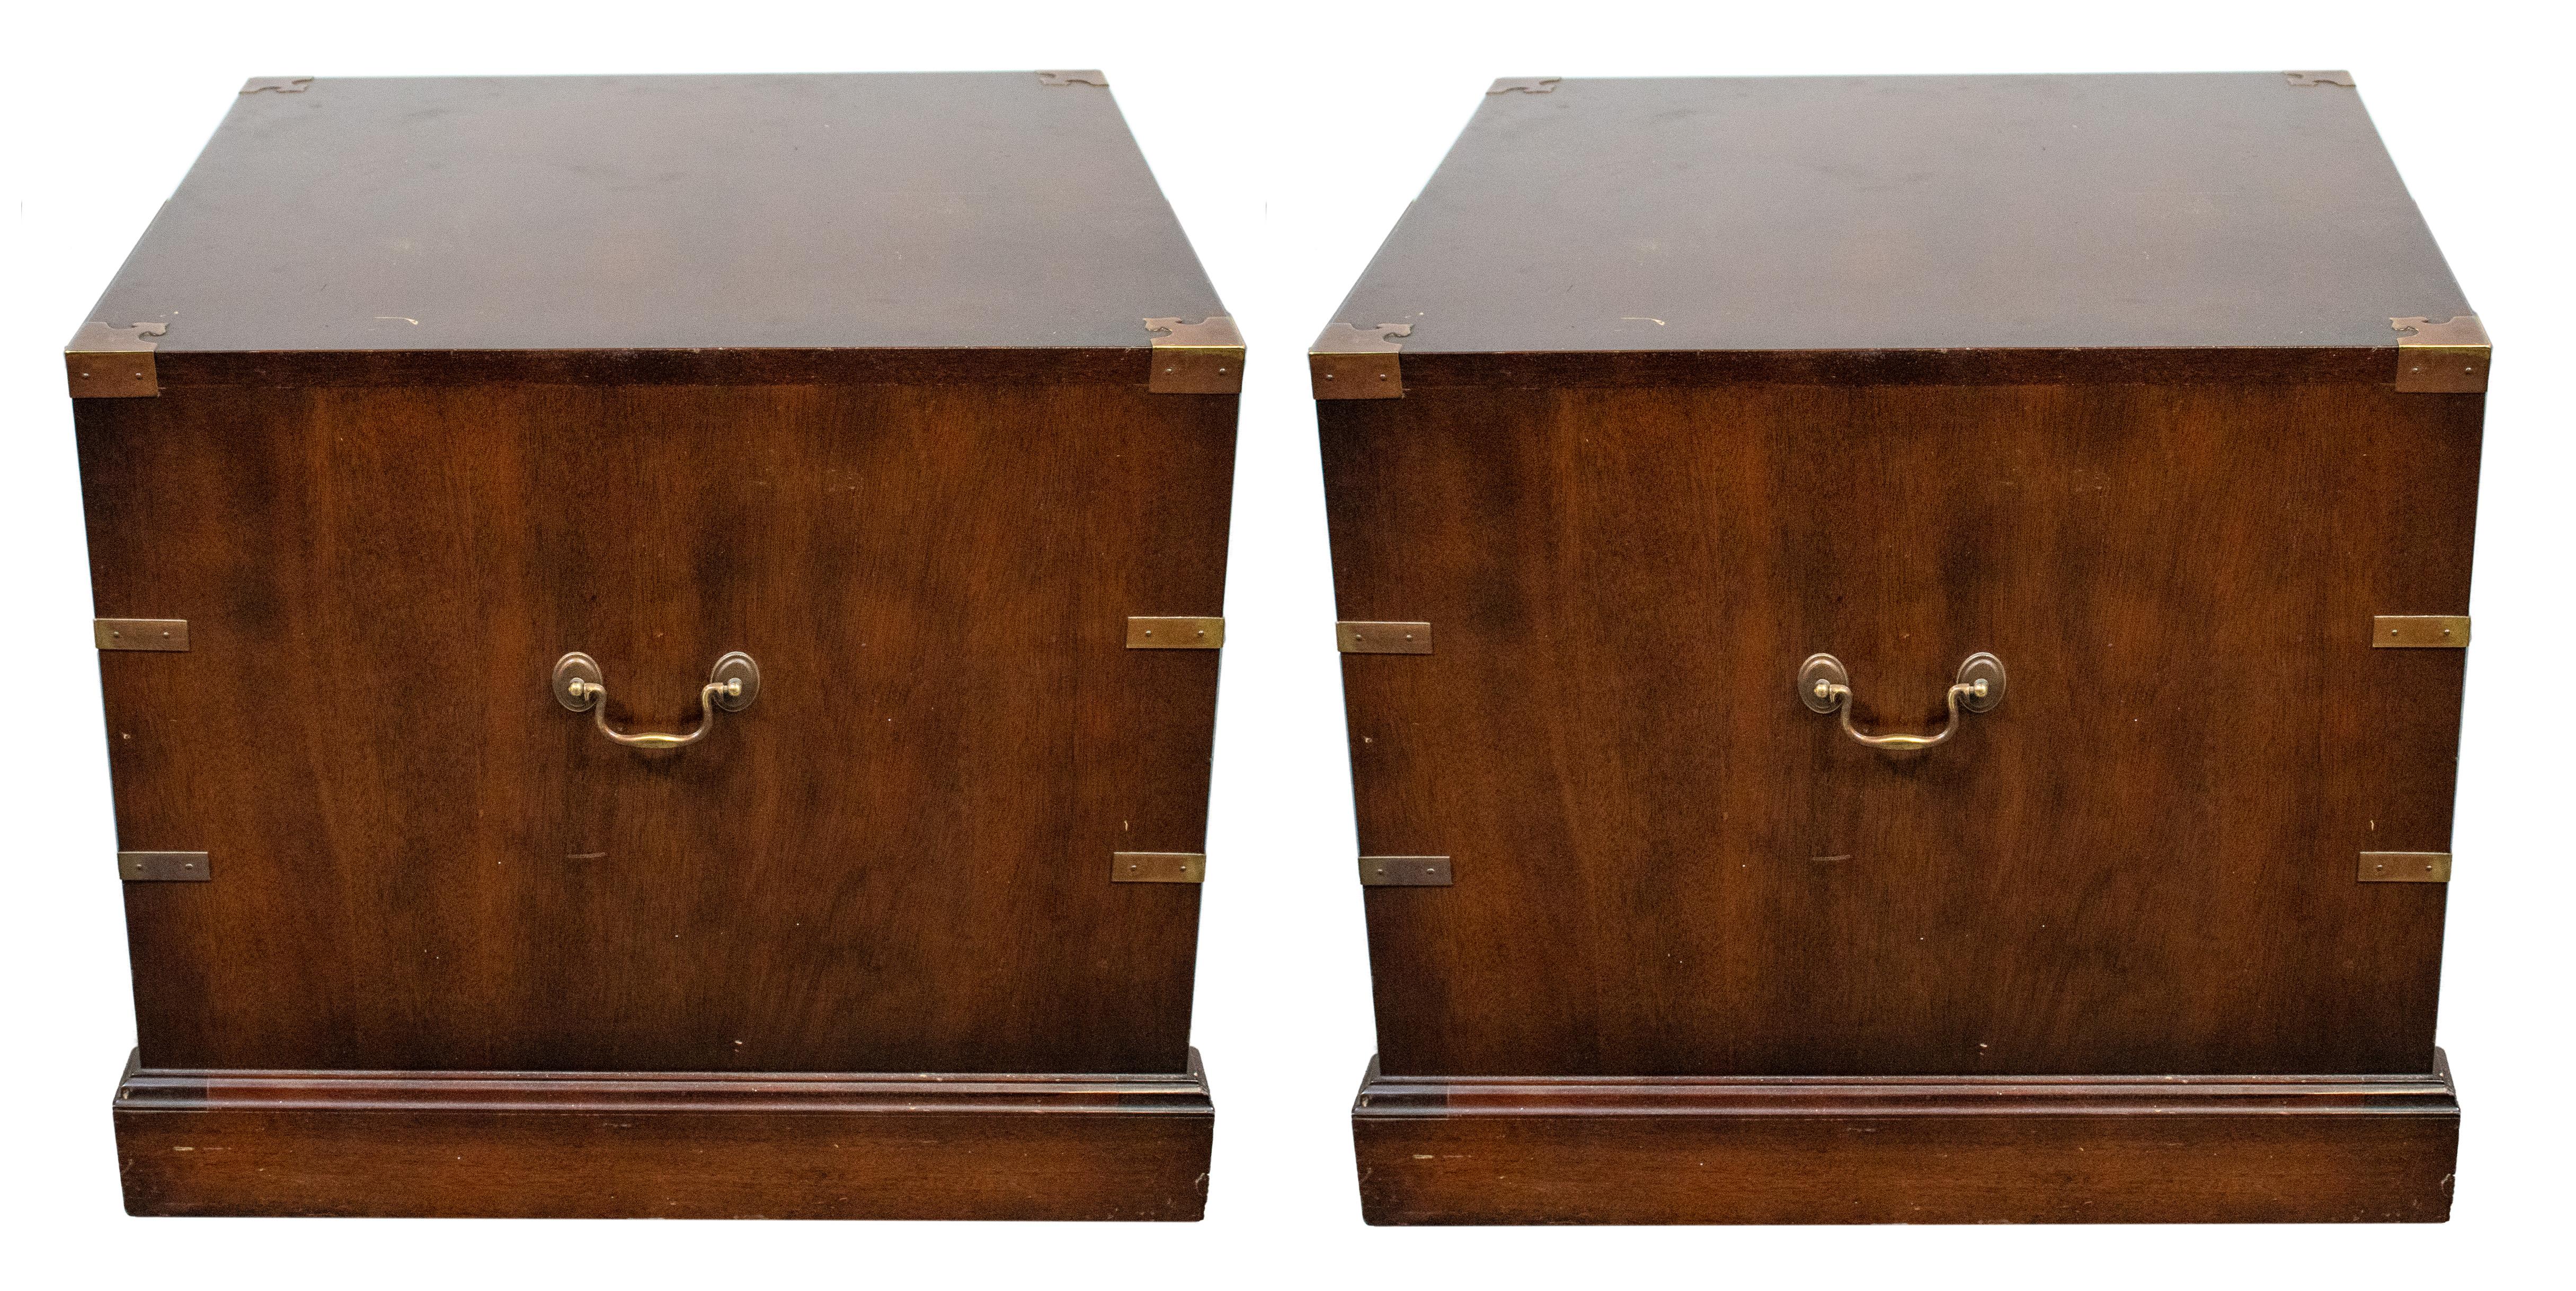 British Colonial English Mahogany Campaign Chest of Drawers, Pair For Sale